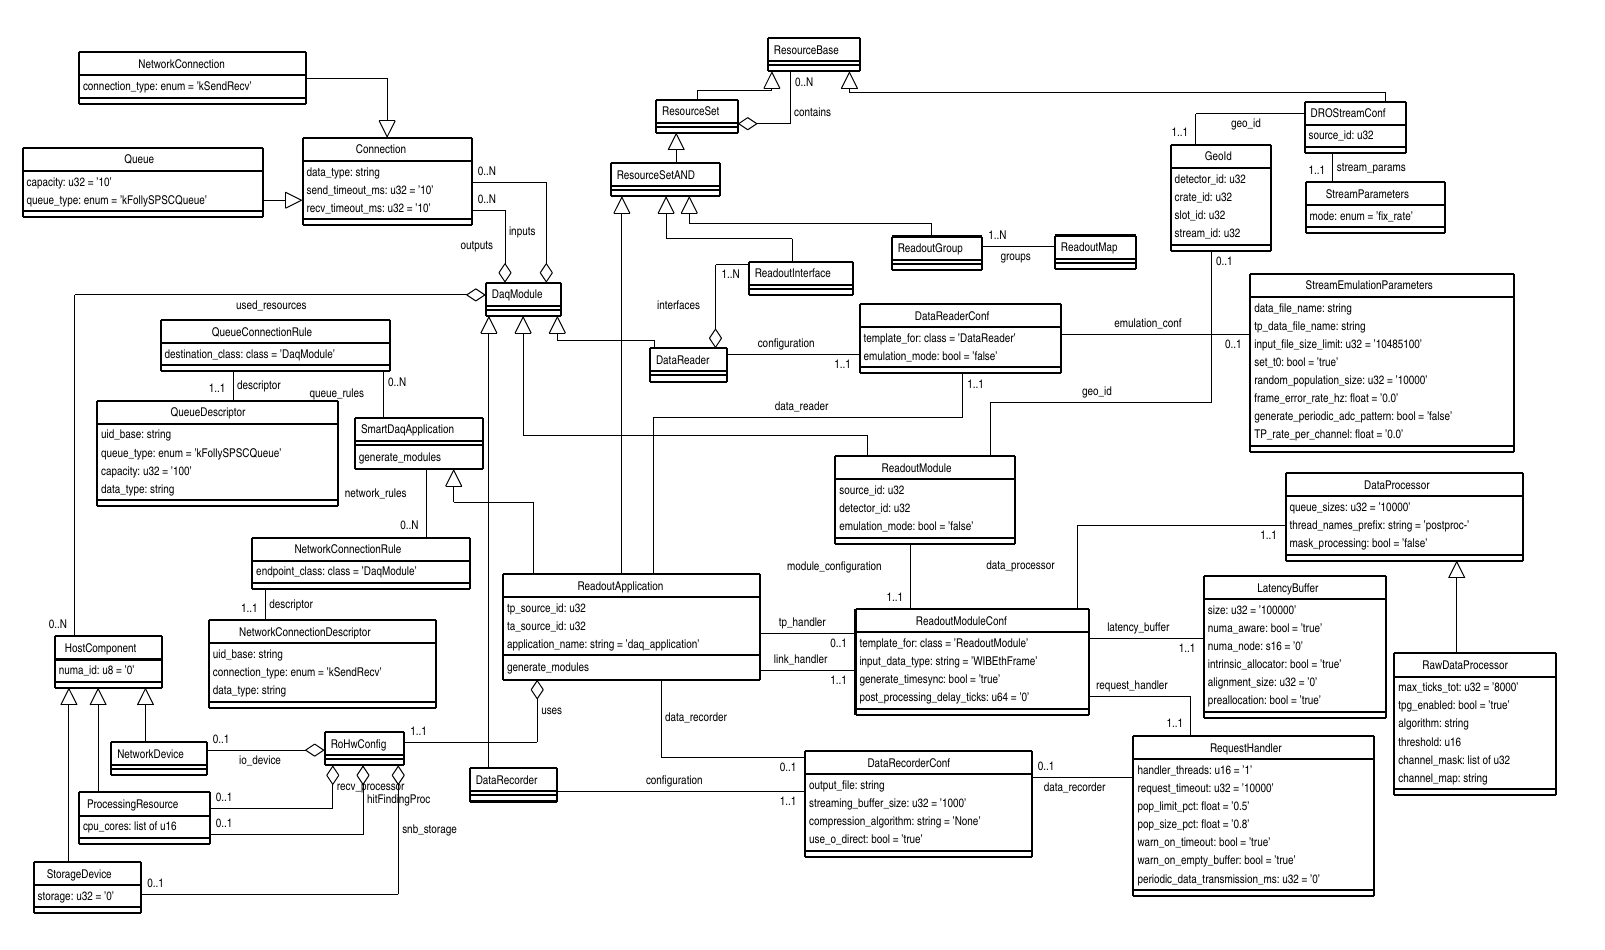 ReadoutApplication schema class diagram not including classes whose
  objects are generated on the fly